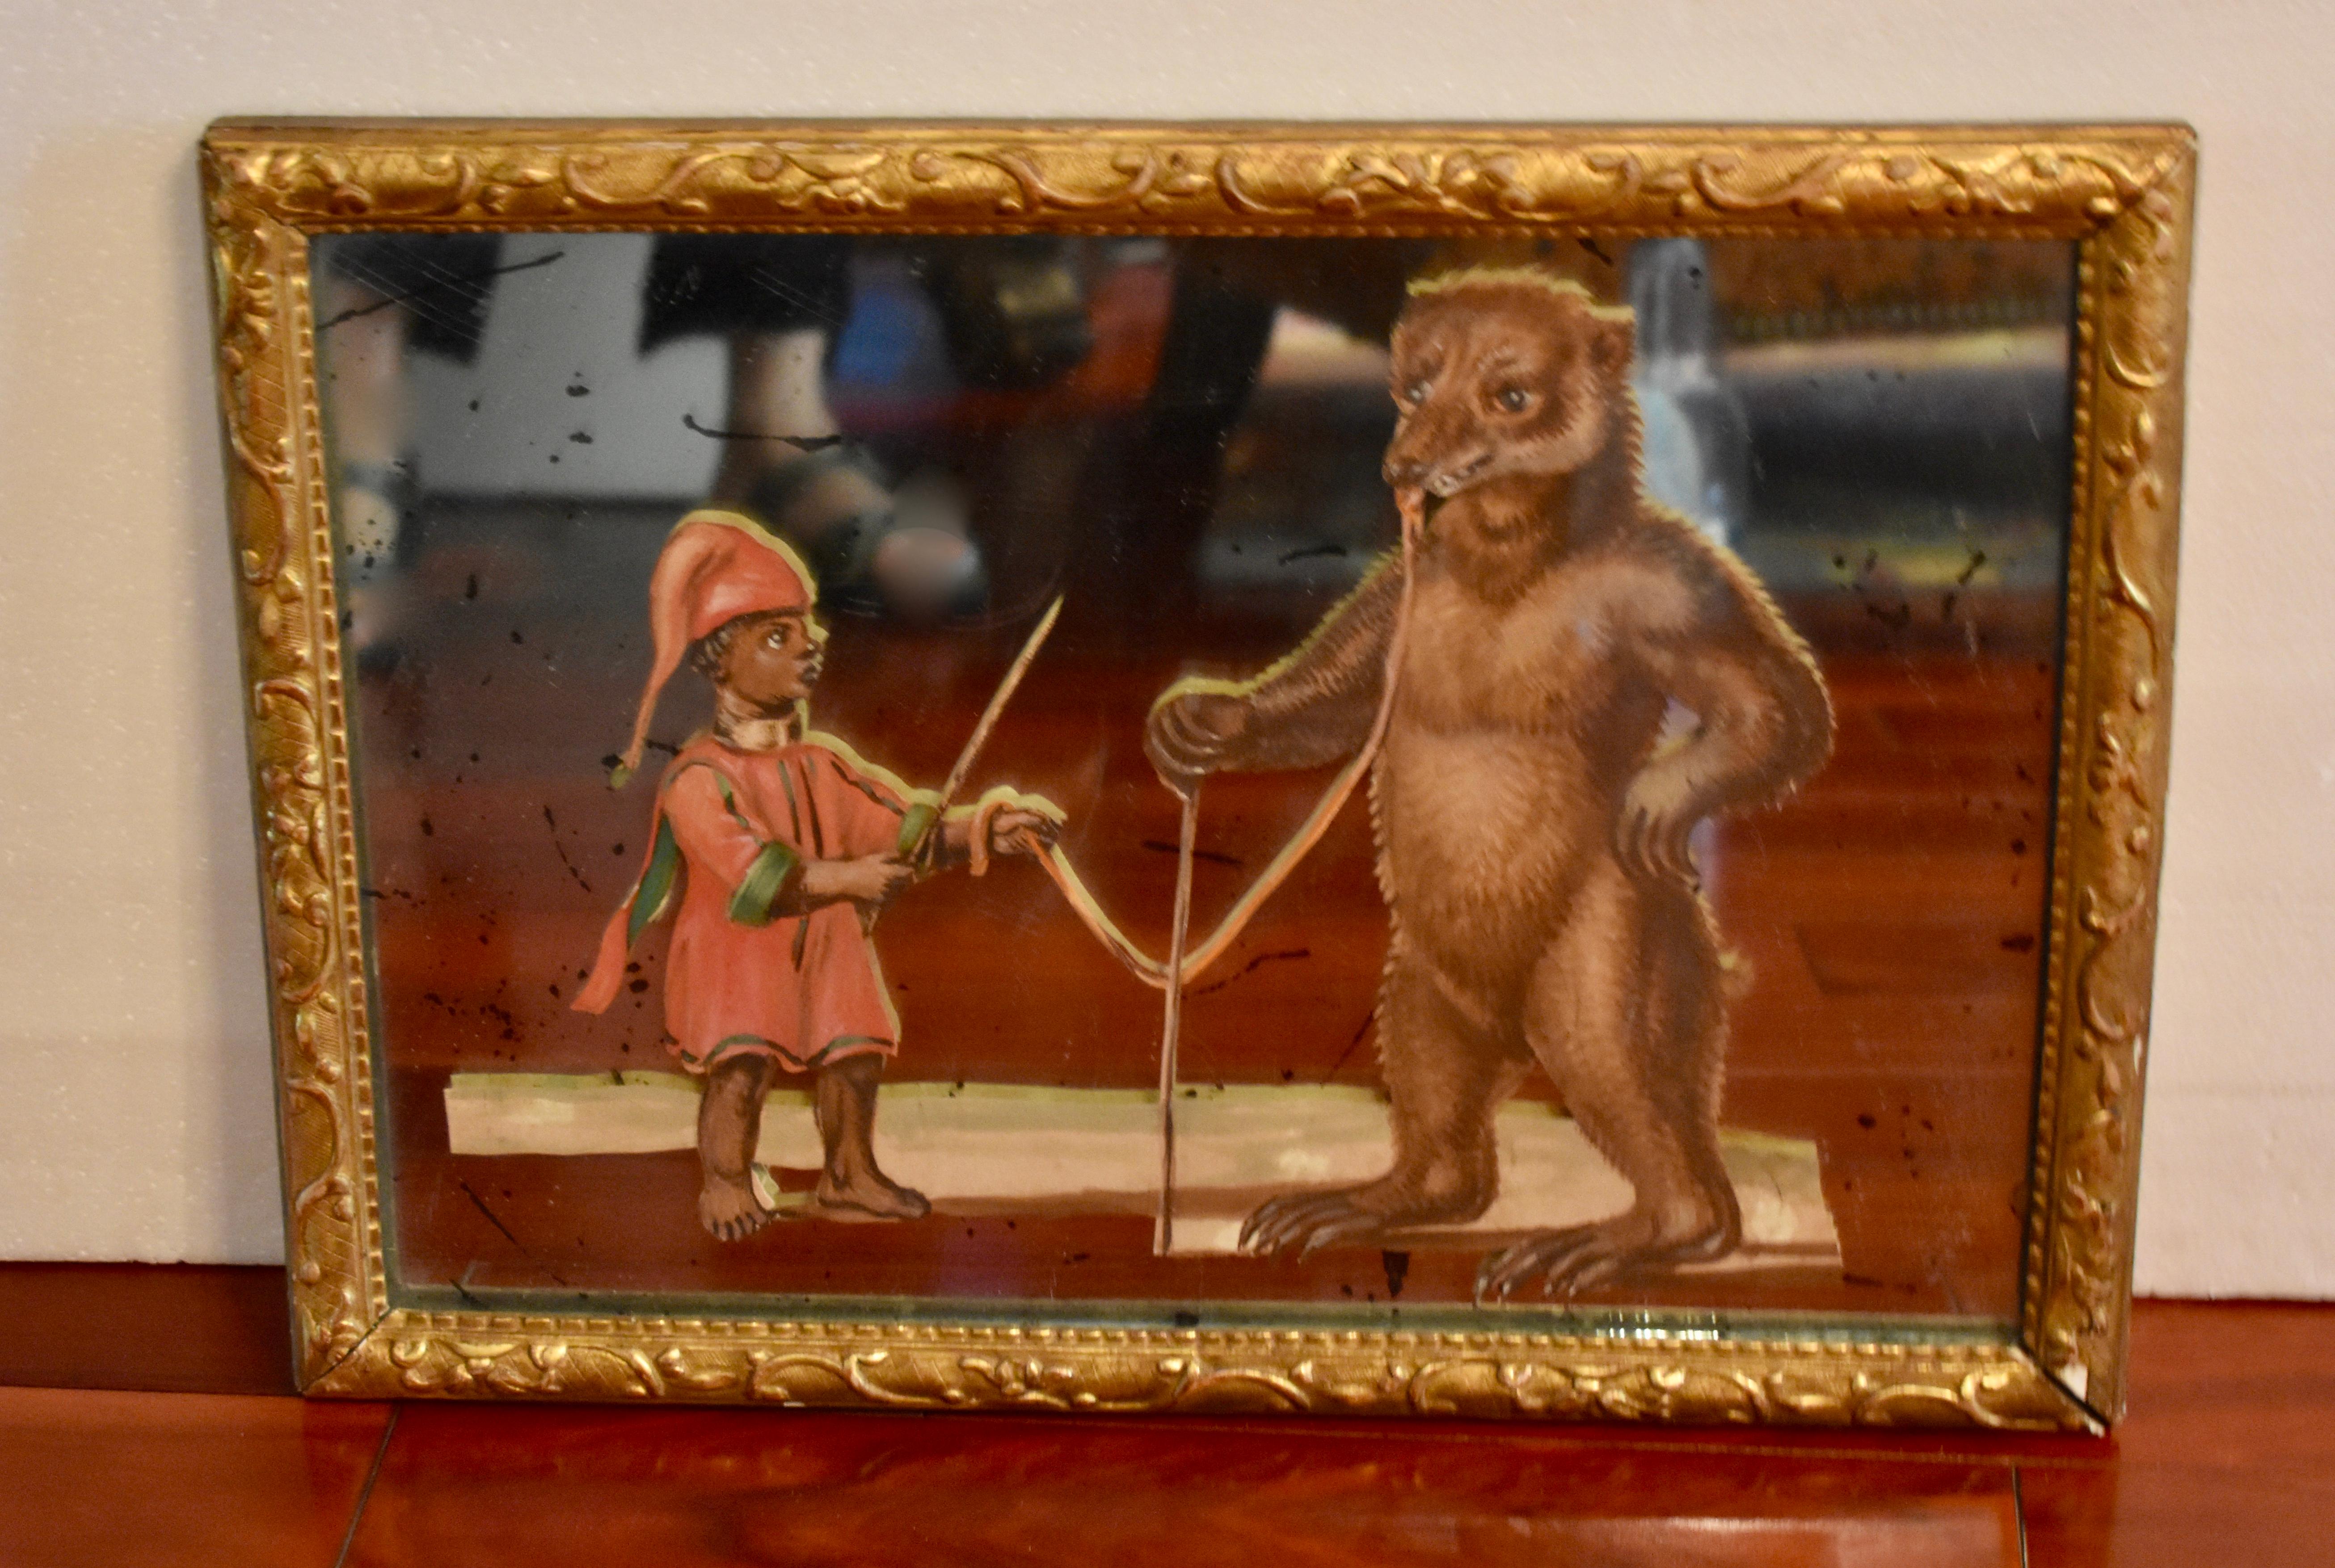 A unique 19th century French exotic themed, hand painted, decoupaged and mirrored depiction of a young animal trainer and his bear. 

The paper figural scene is cut and mounted between glass and a mirror backing, showing a boy training a standing